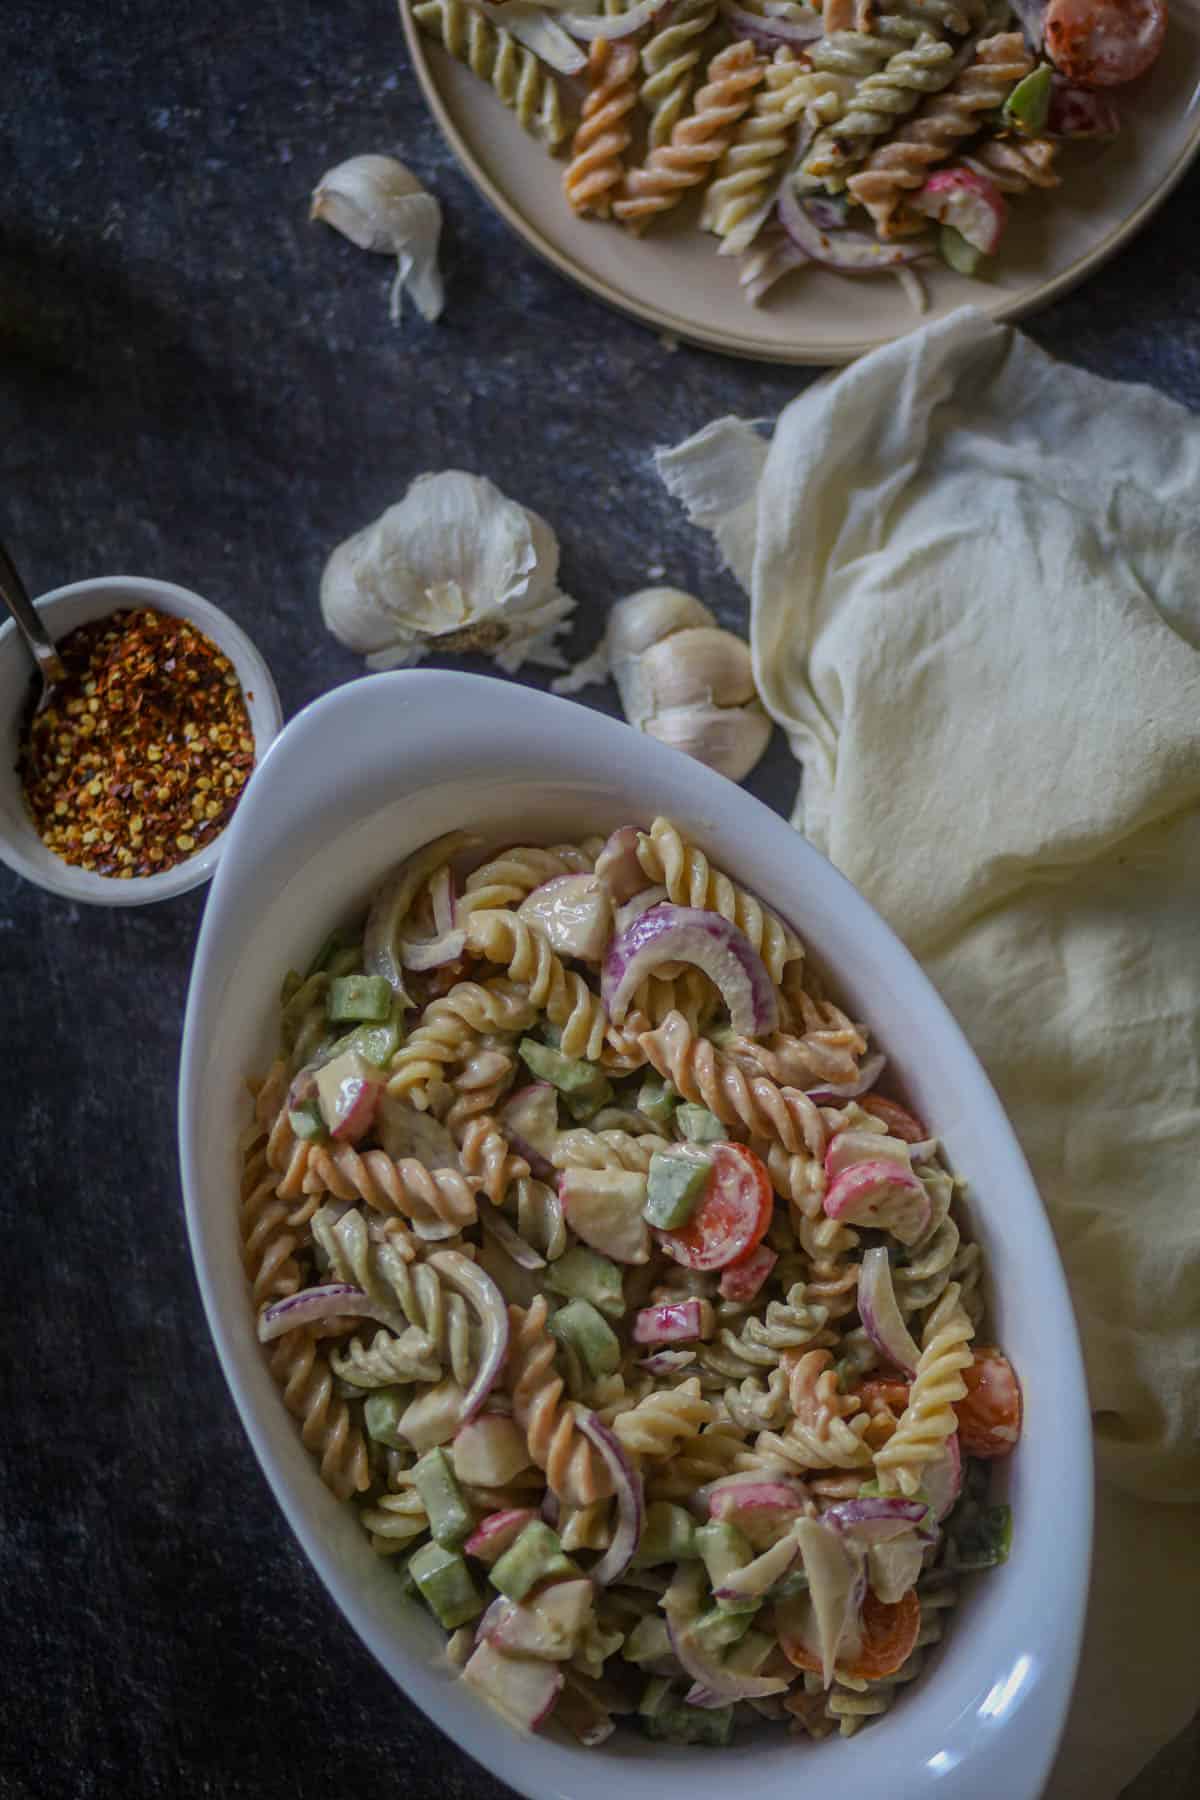 Tricolor Pasta Salad served in a white bowl.